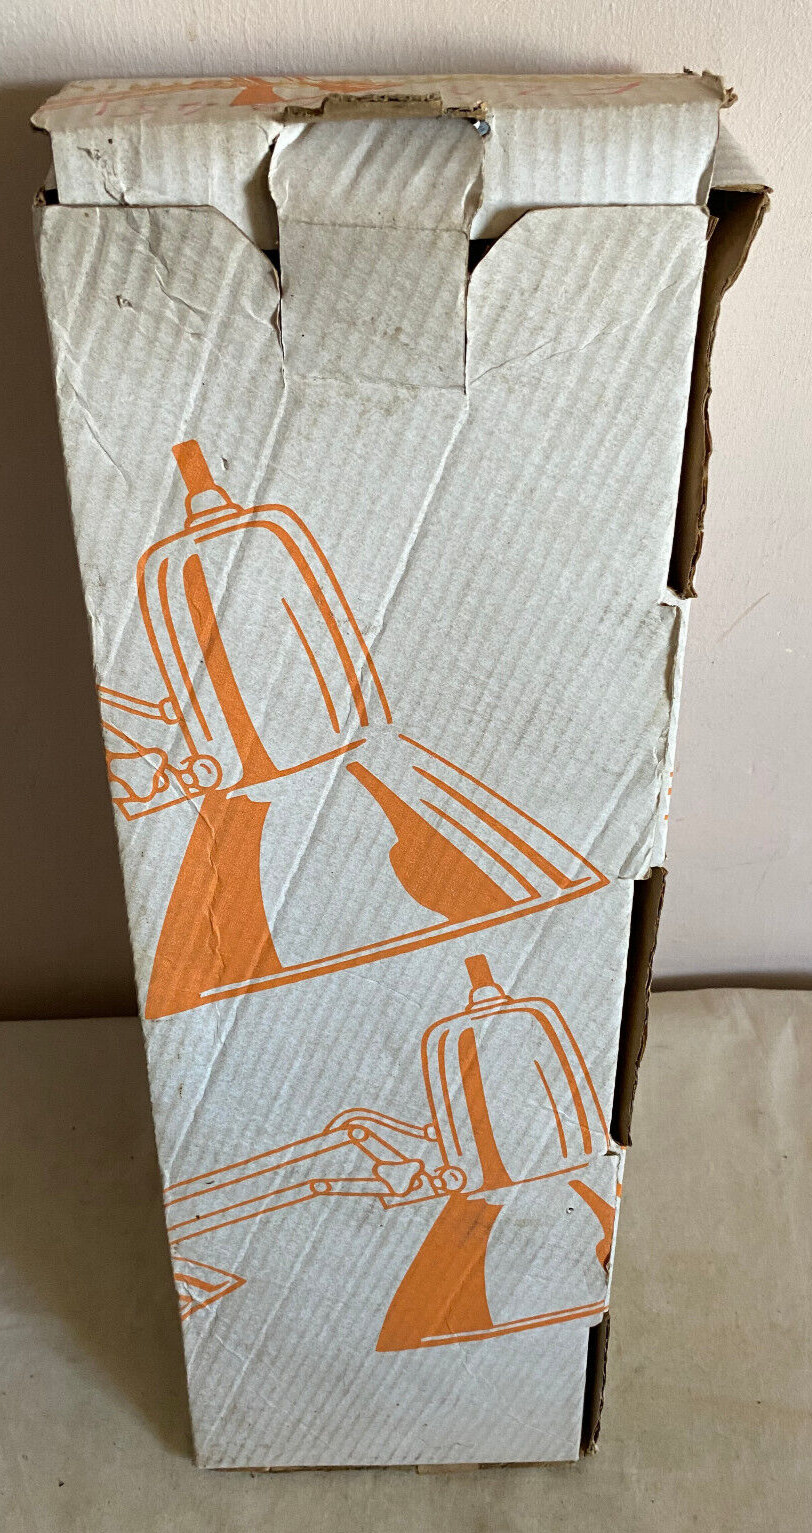 Vintage Anglepoise Lamp In Original Box with Packaging Un-used  / untested Retro